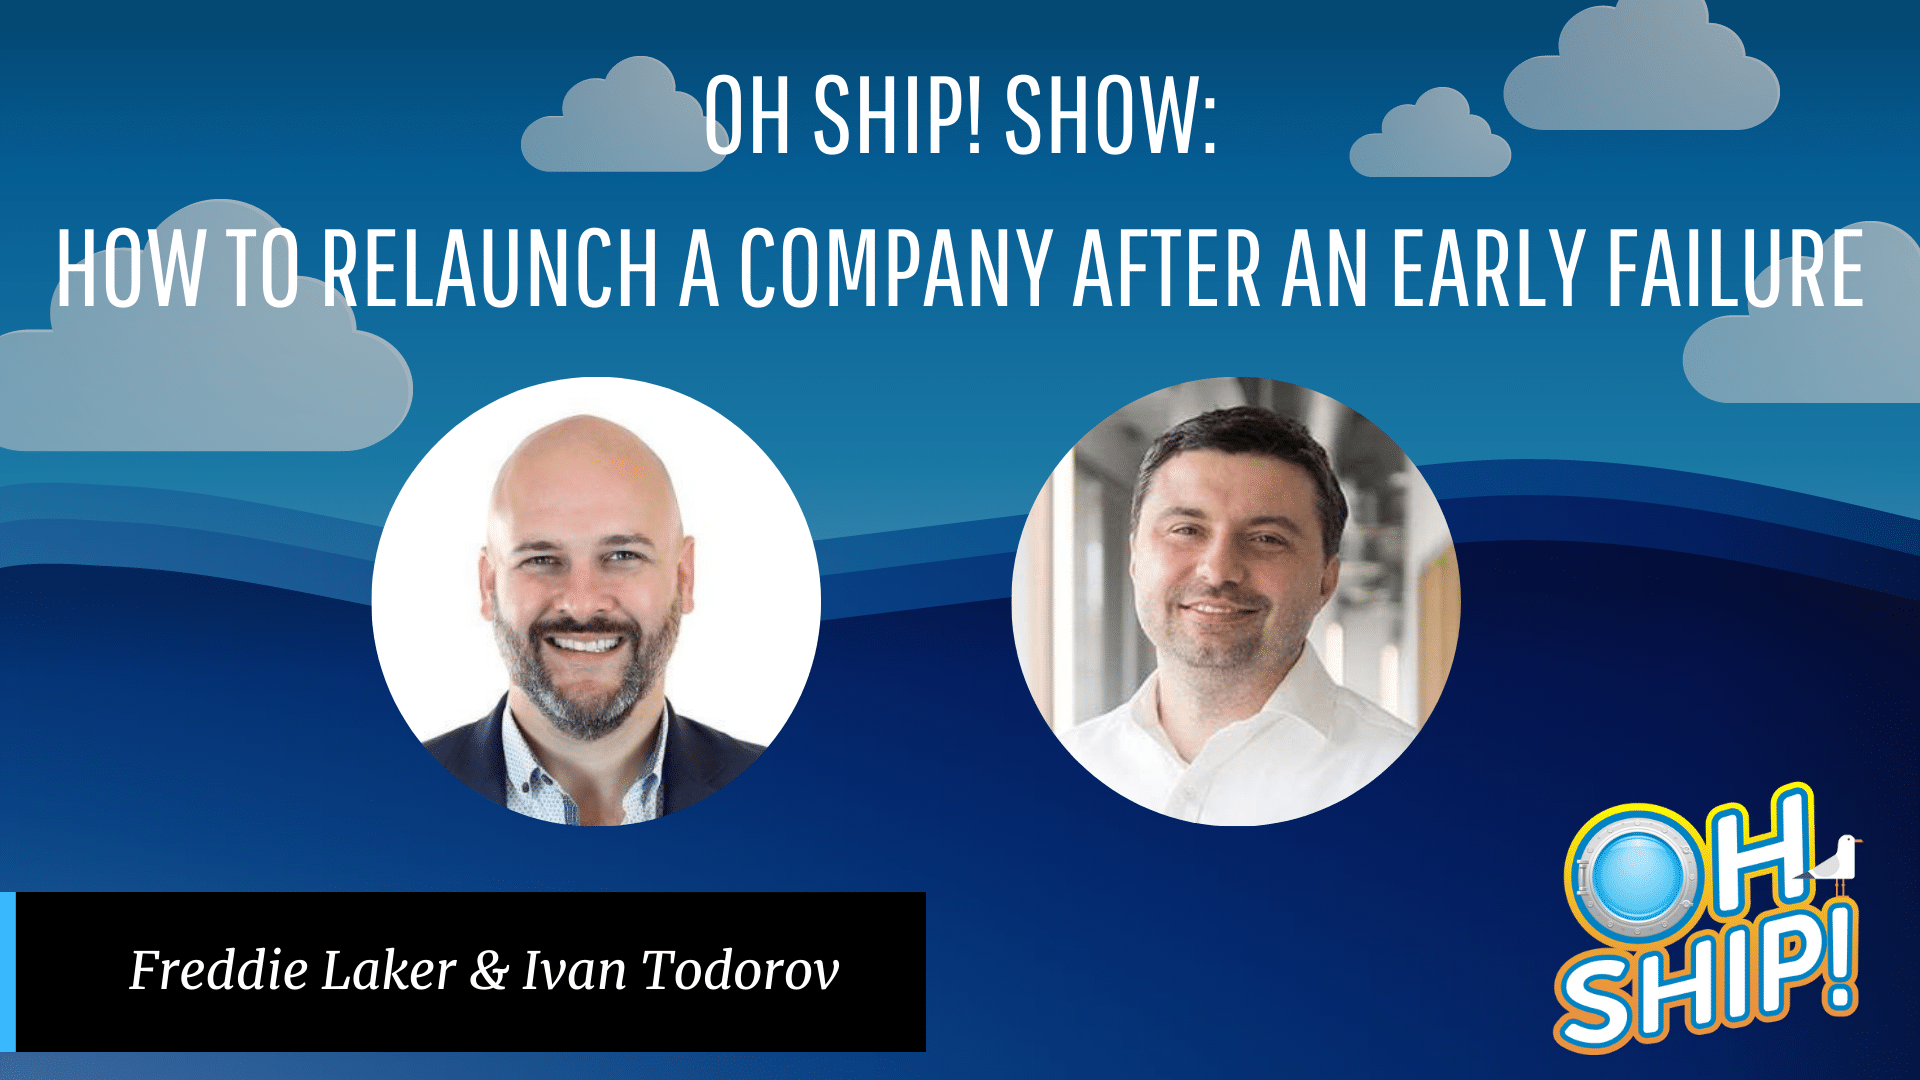 A promotional graphic for the "Oh Ship! Show" featuring the topic "How to Relaunch a Company After an Early Failure." It showcases headshots of Freddie Laker and Ivan Todorov against a blue background with stylized clouds and the "Oh Ship!" logo, highlighting tips on starting over.